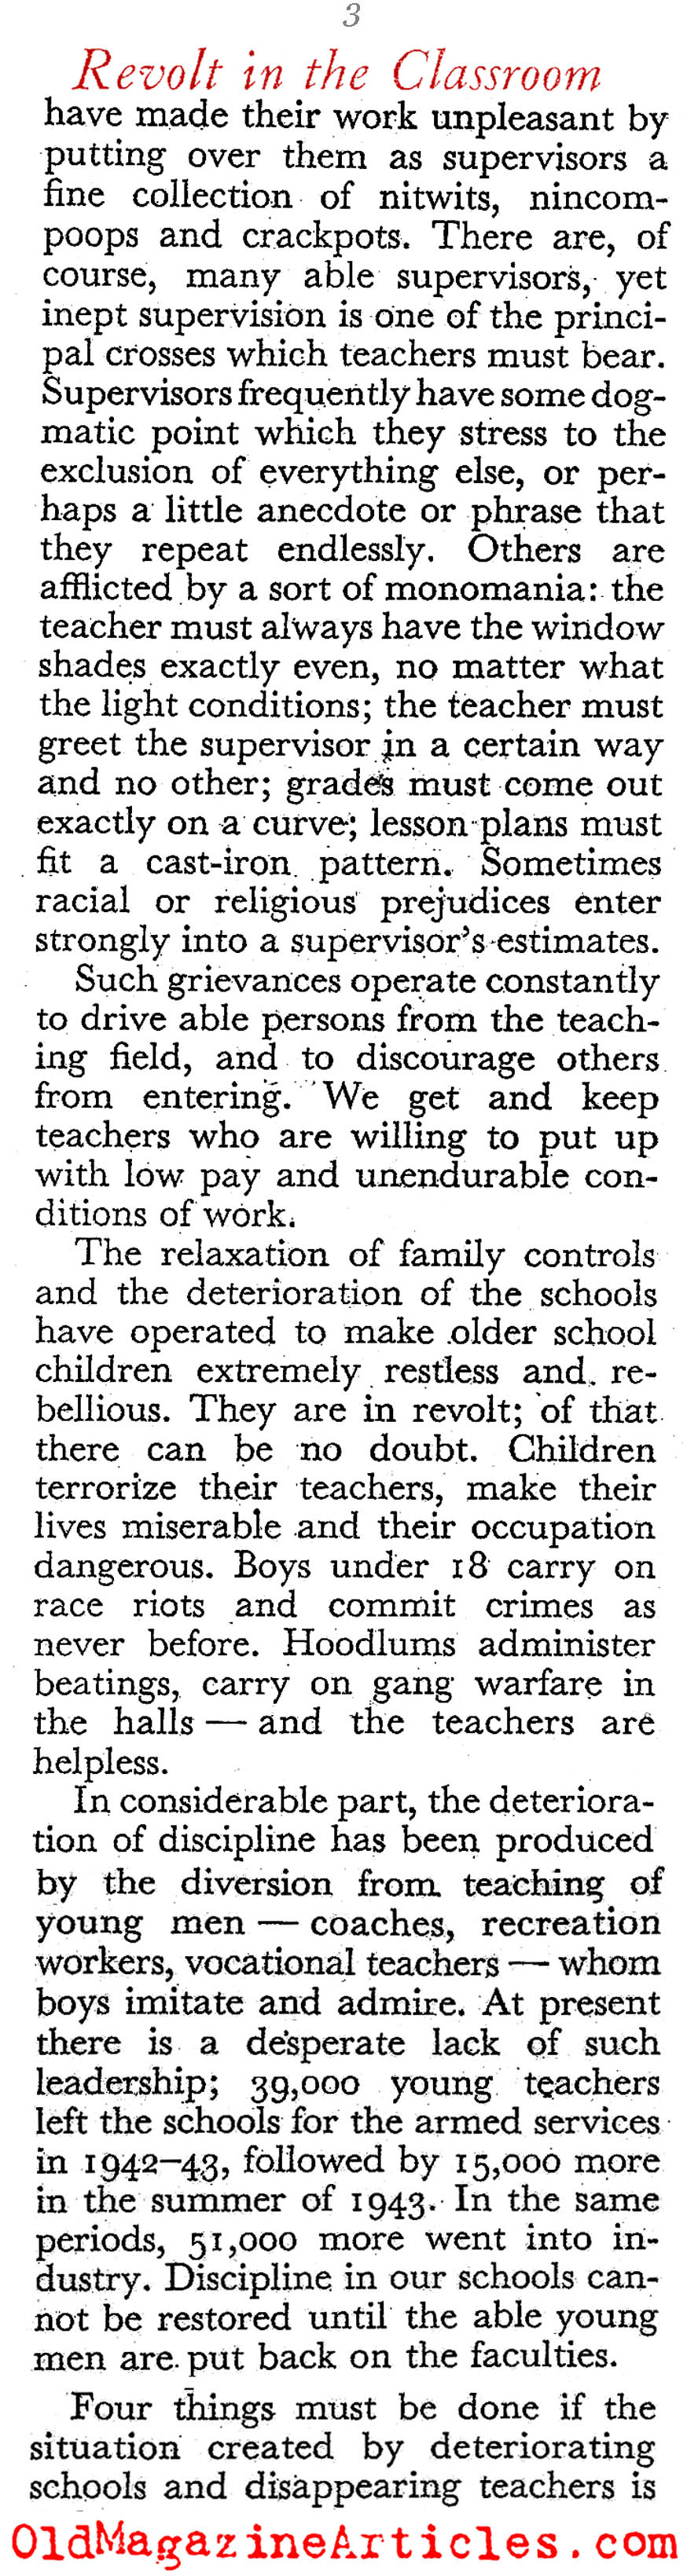 ''Revolt in the Classroom (The Saturday Review, 1943)